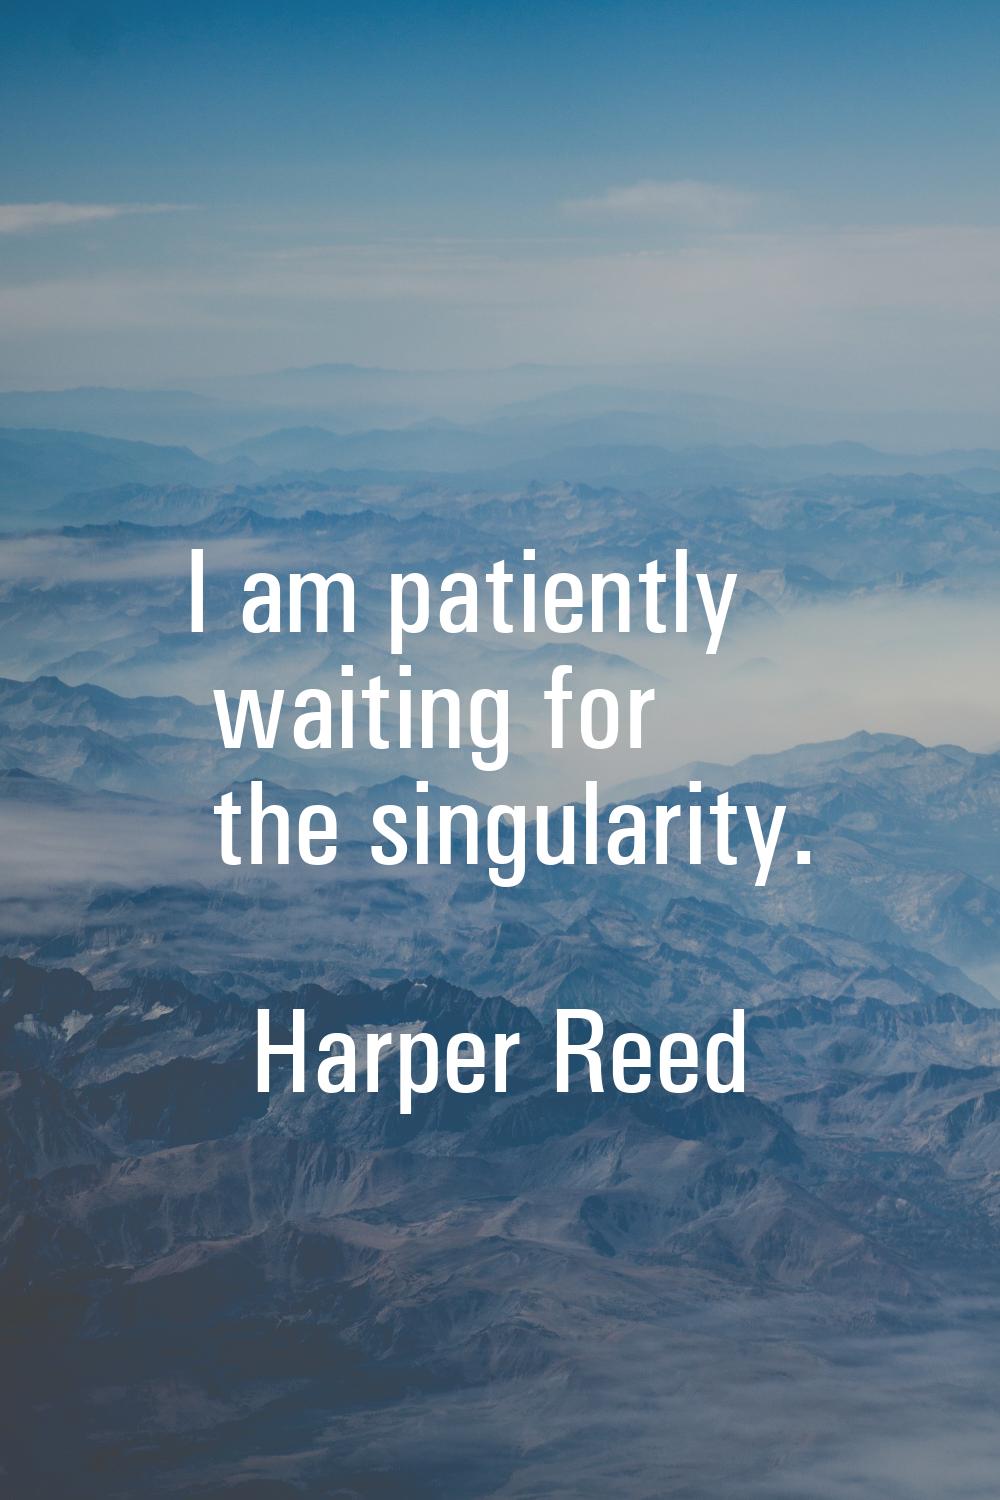 I am patiently waiting for the singularity.